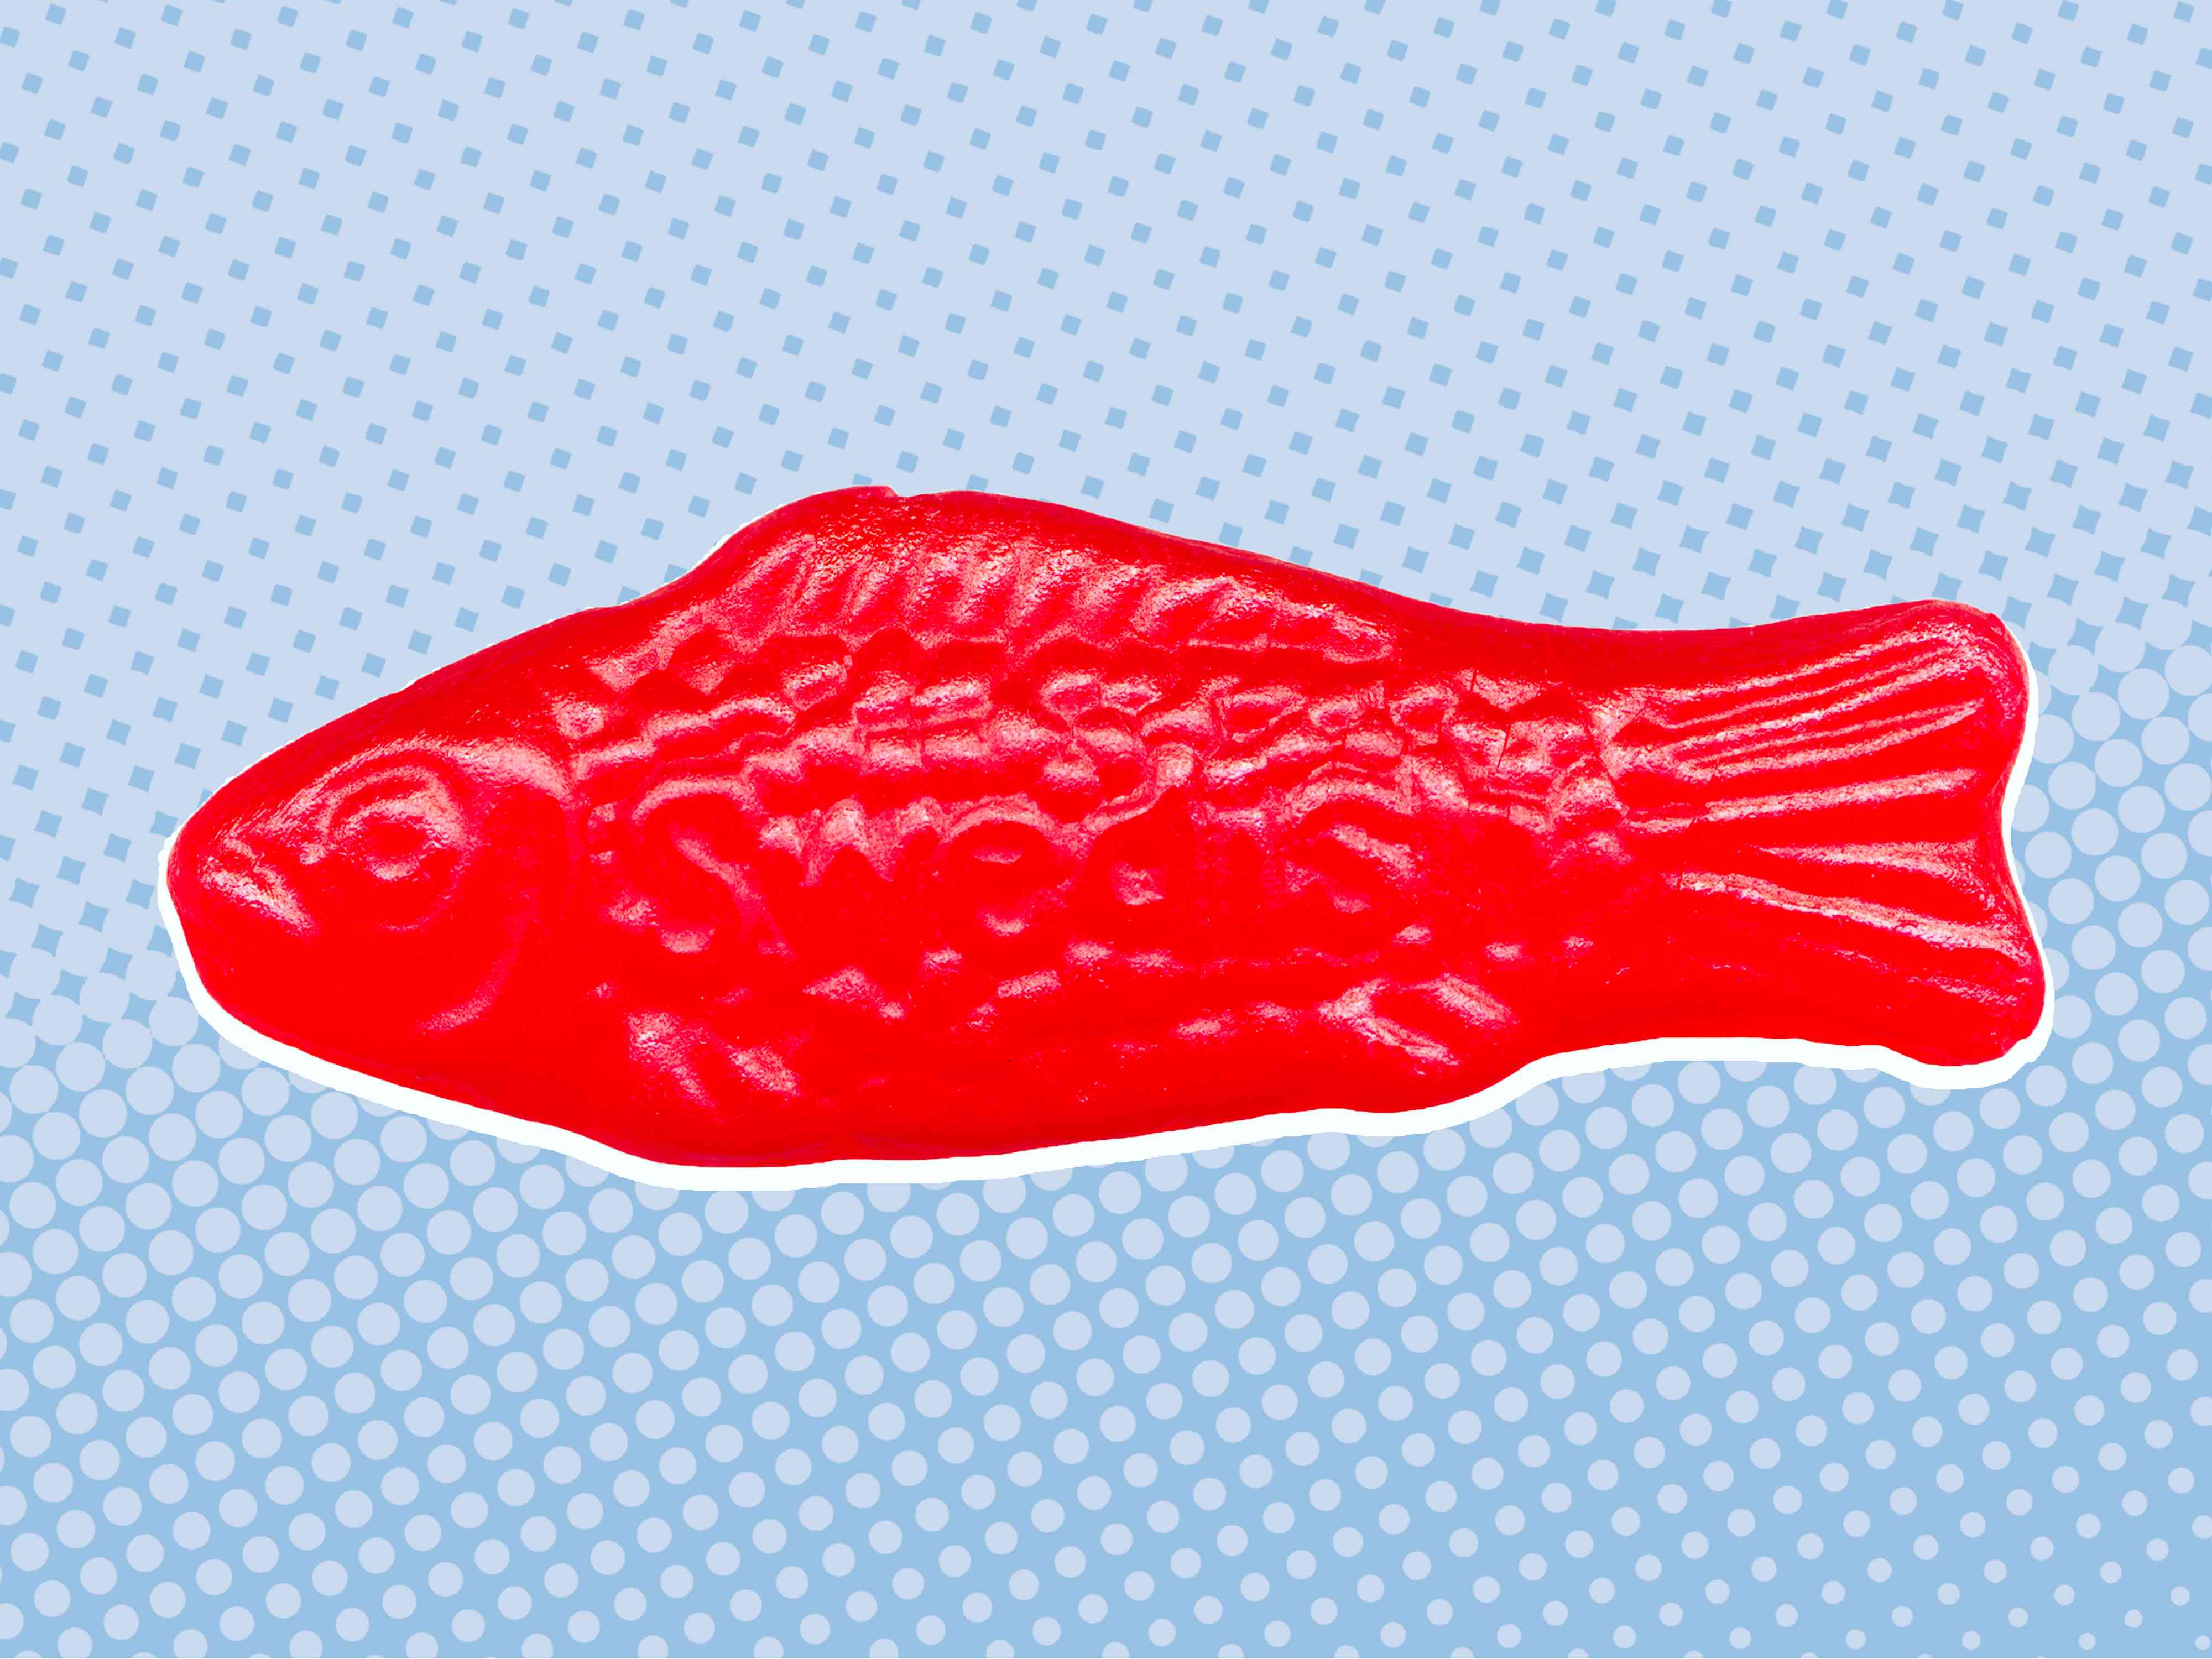 You’ll Never Guess What Swedish Fish Are Actually Supposed to Taste Like